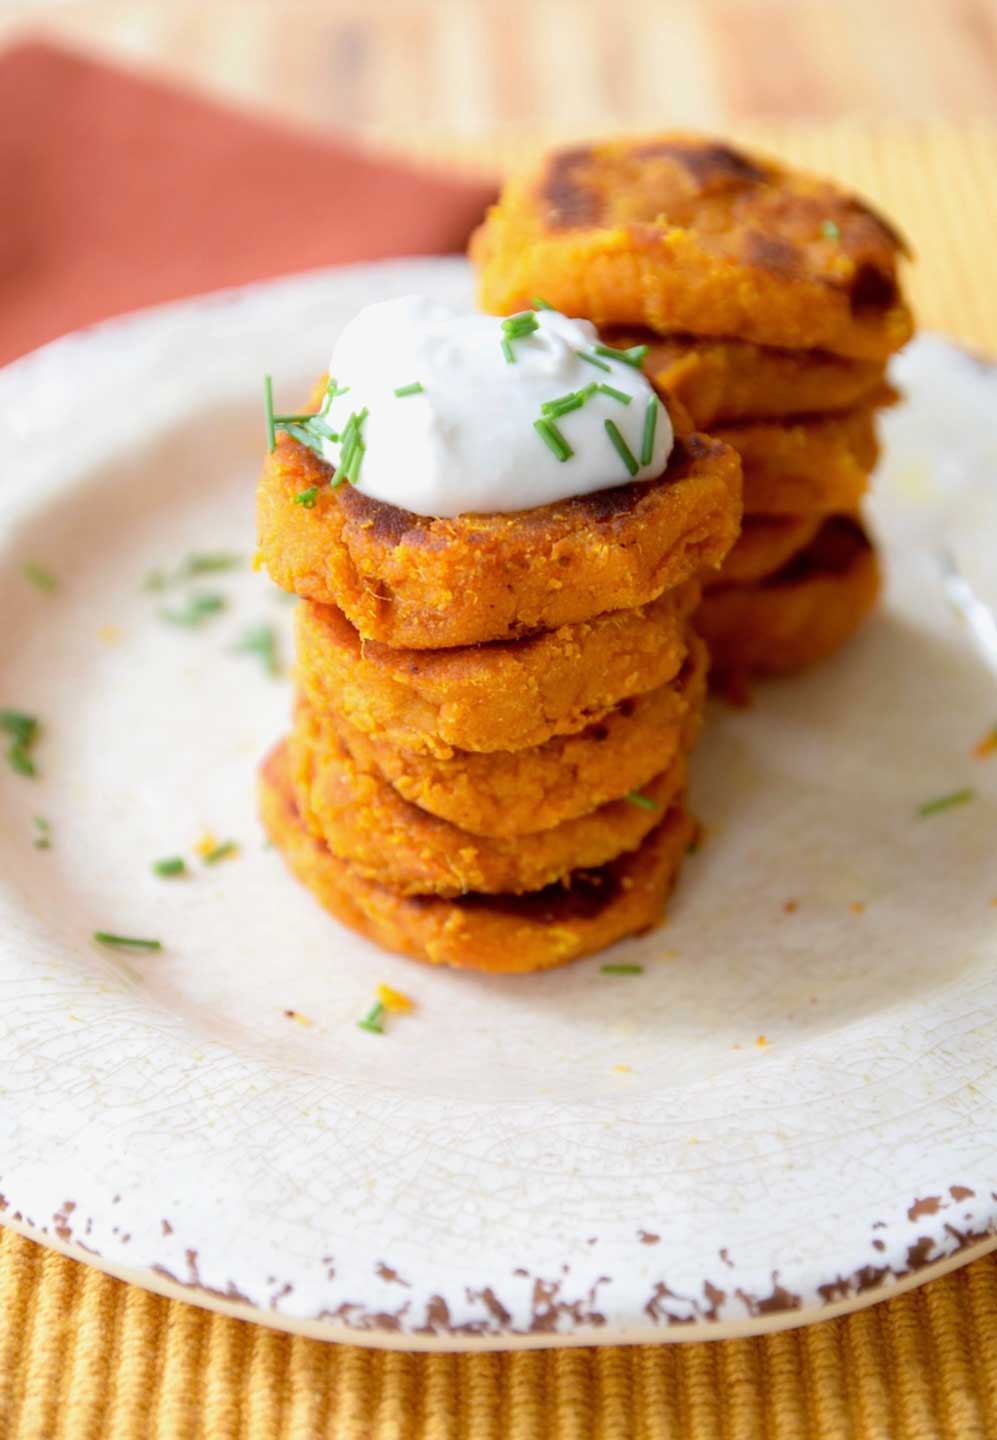 Two Thanksgiving flavors in one special recipe: sweet potatoes and pumpkin combine in these scrumptious fritters for a fun twist on Thanksgiving classics! It all begins as an Instapot recipe, and finishes quickly on your stovetop.